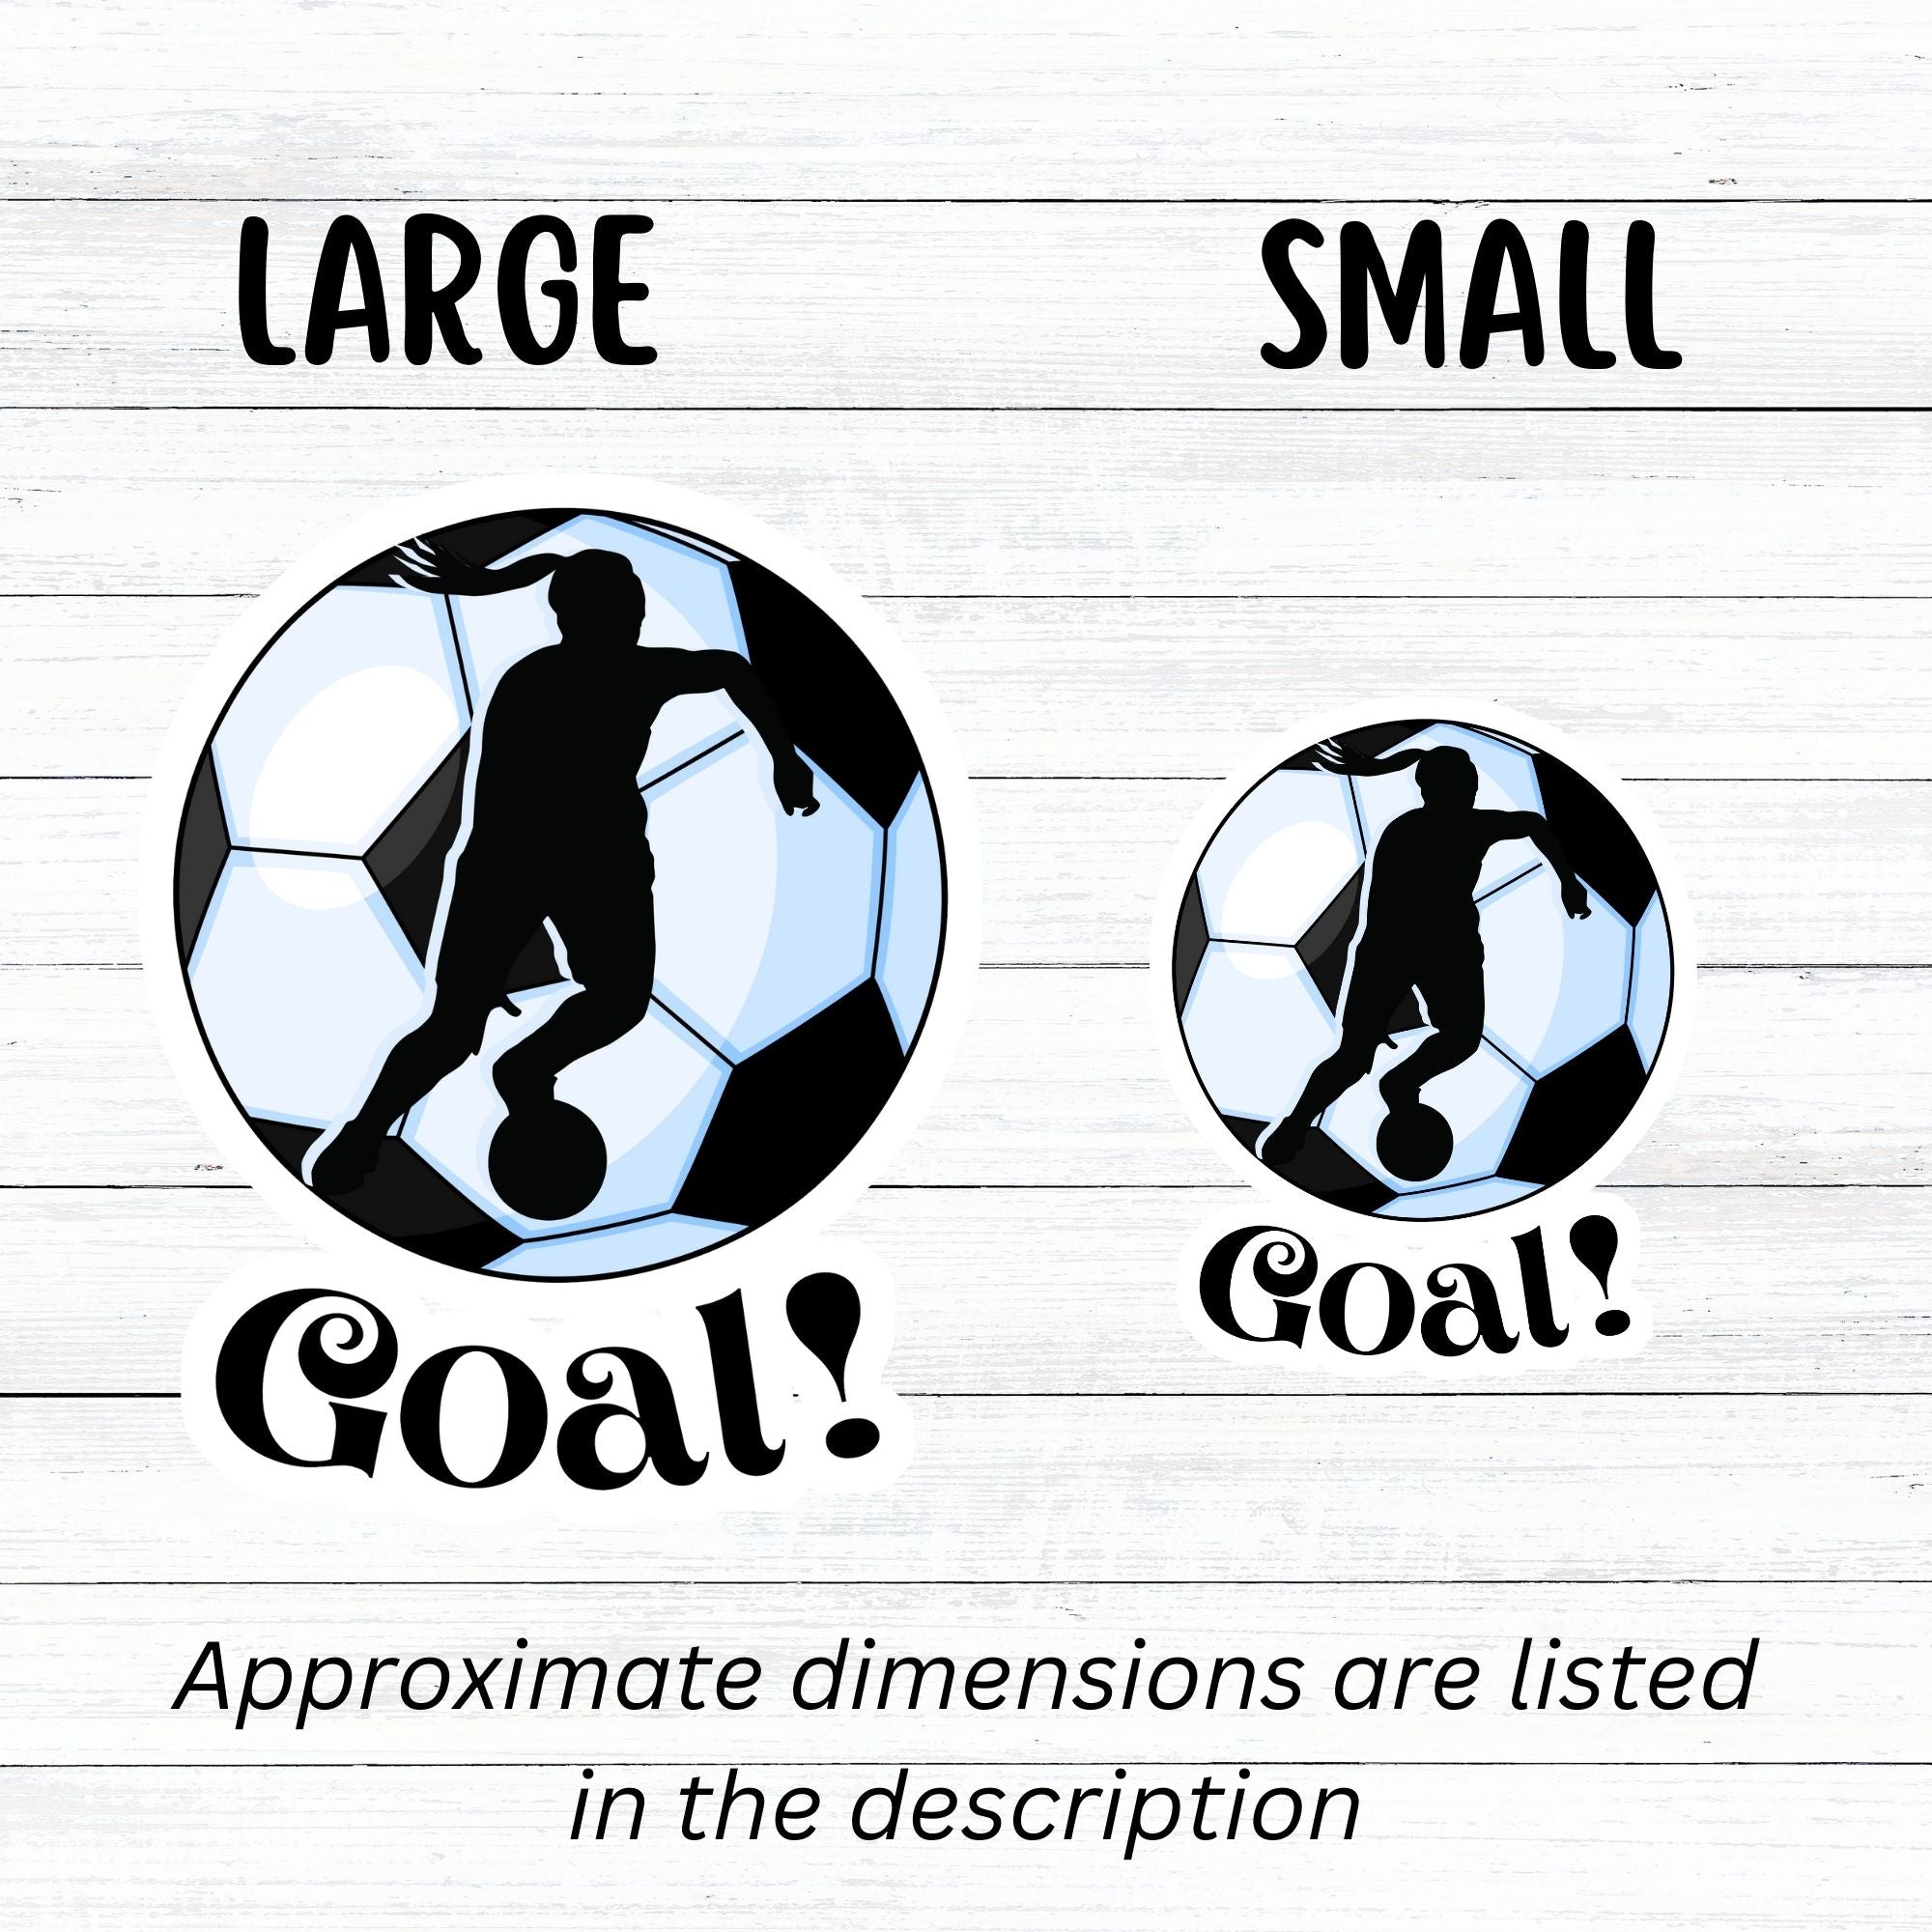 Show your love of soccer, or football, with this individual die-cut sticker! This sticker shows the silhouette of a player with a ponytail about to kick, on a black and white/blue soccer ball background, with the word "Goal!" below. This image shows the large and small soccer stickers next to each other.